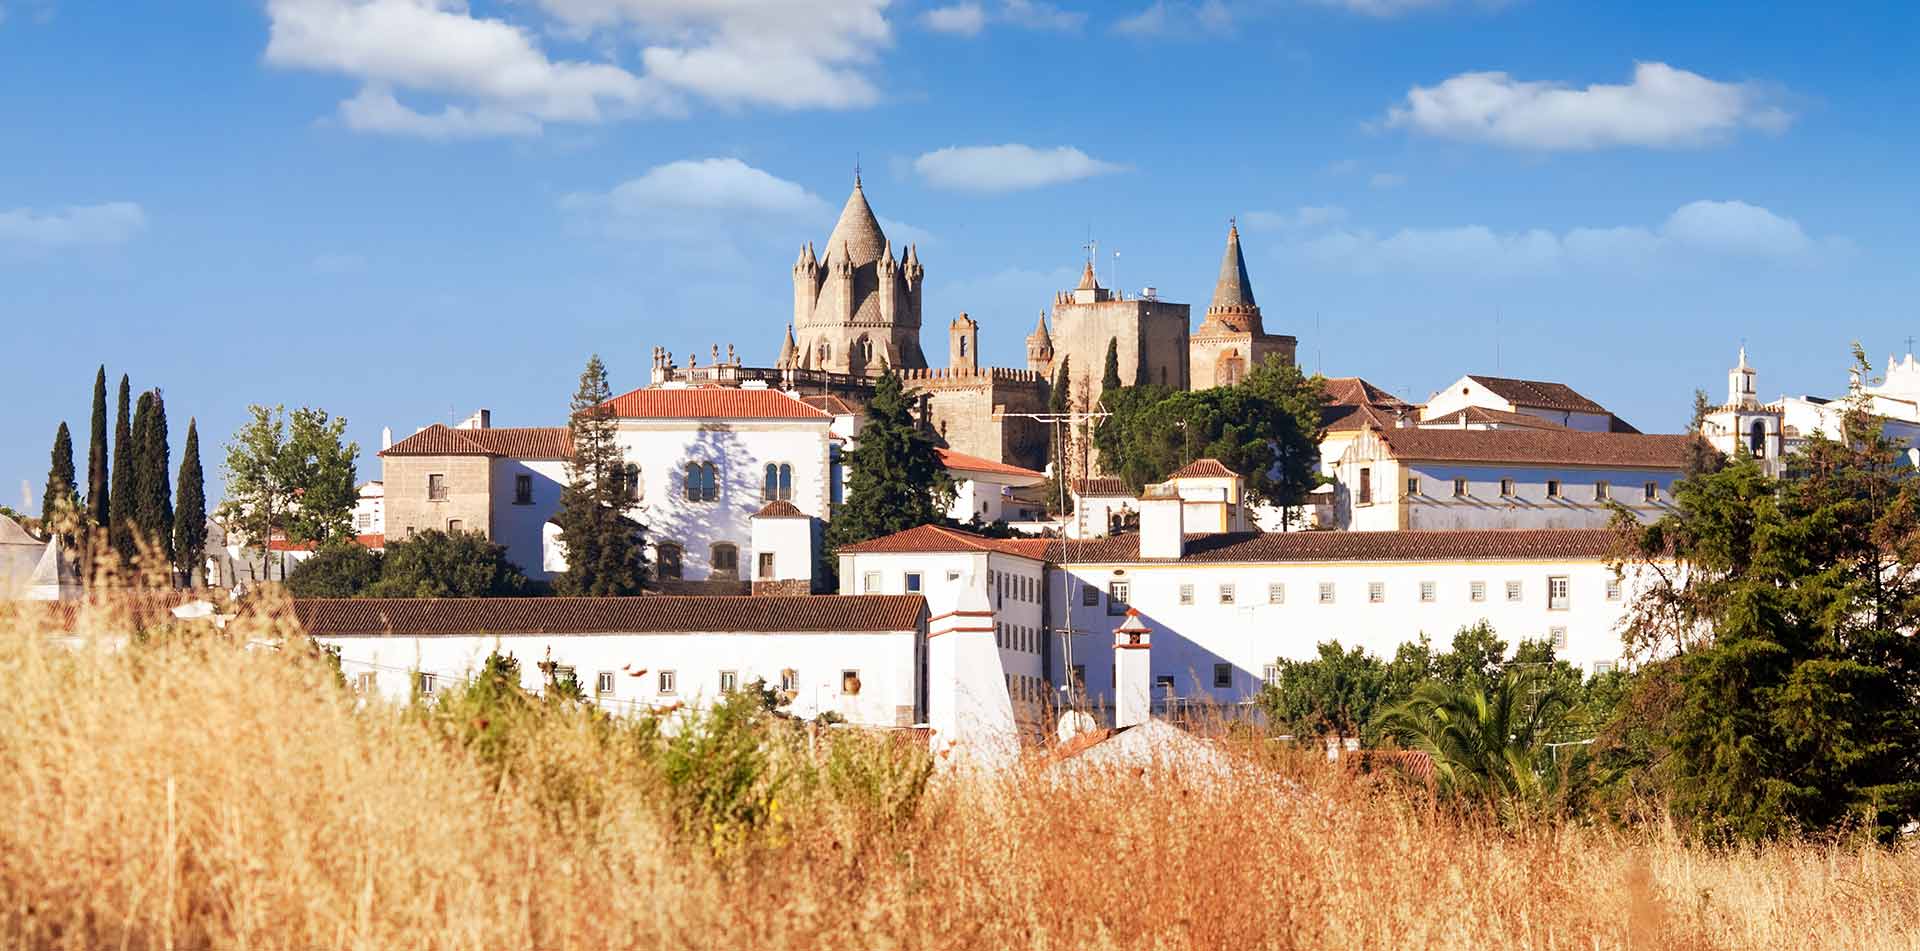 Explore Evora, Portugal, on foot at eye level